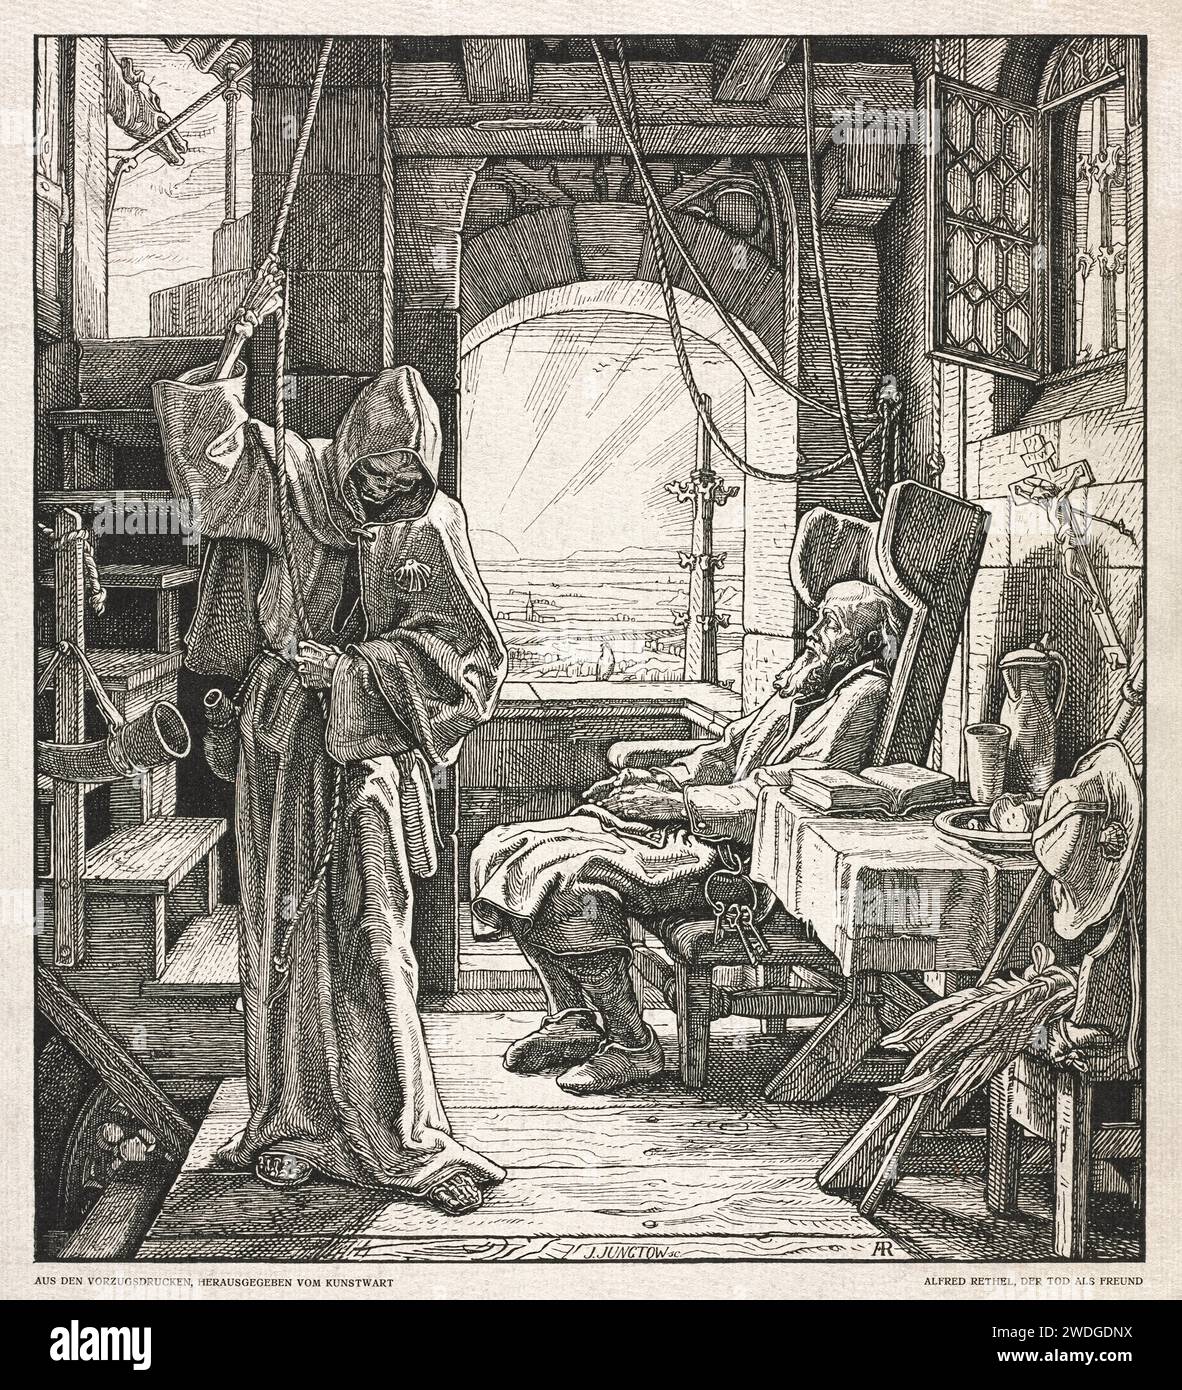 ‘Der Tod als Freund’ [Death as a Friend] 1851 woodcut by Alfred Rethel (1816-1859) showing Death tolling the bell for the passing of an elderly Christian man sleeping peacefully in his chair in the bell tower with the sun setting. Stock Photo